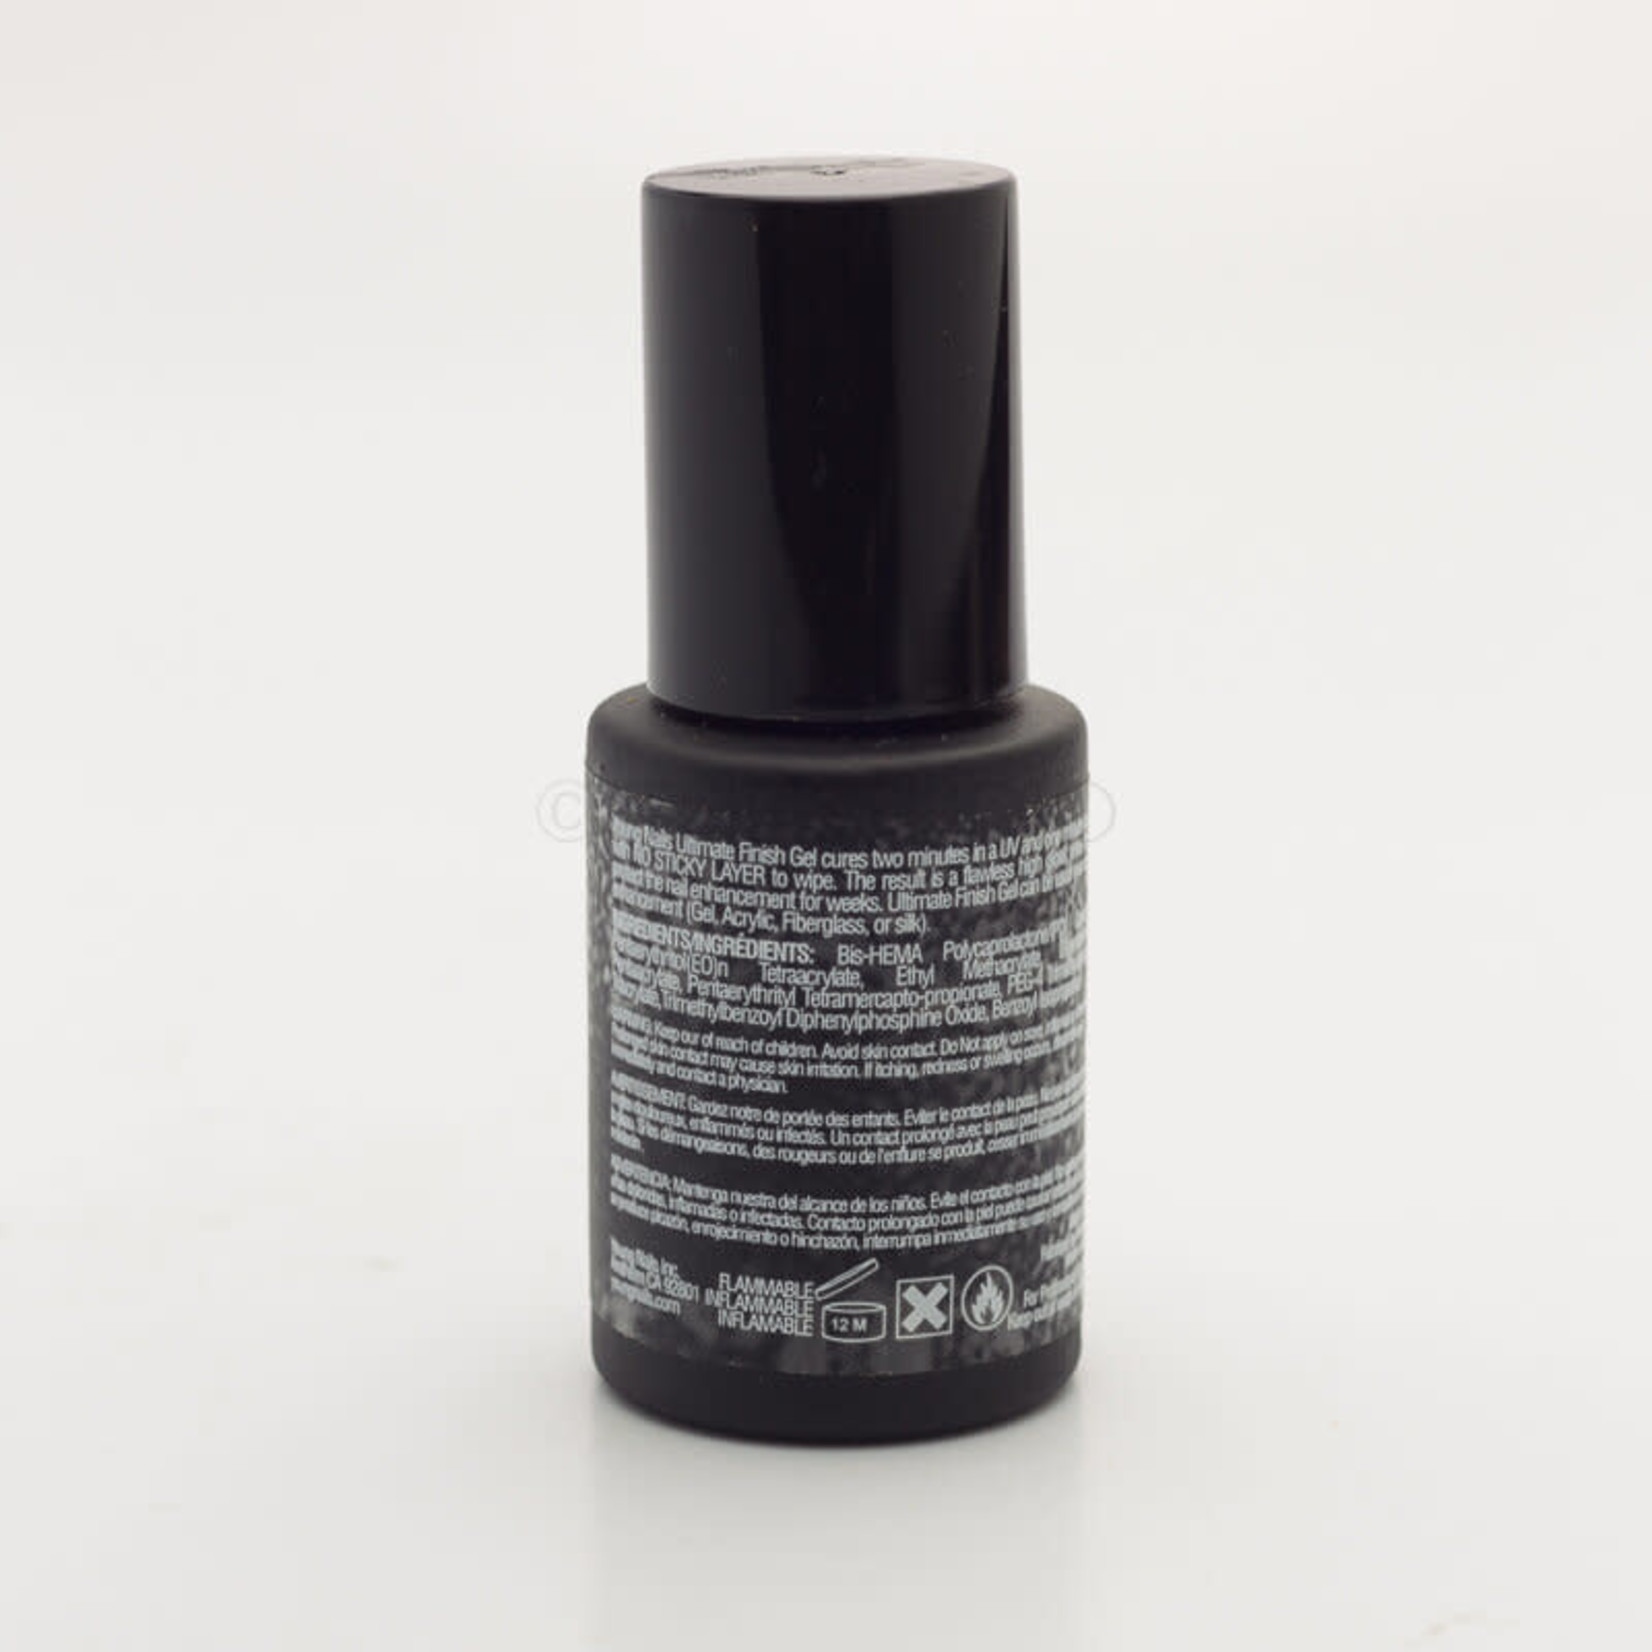 Young Nails Young Nails - Gel - Ultimate Finish Top Coat  - 0.34 oz